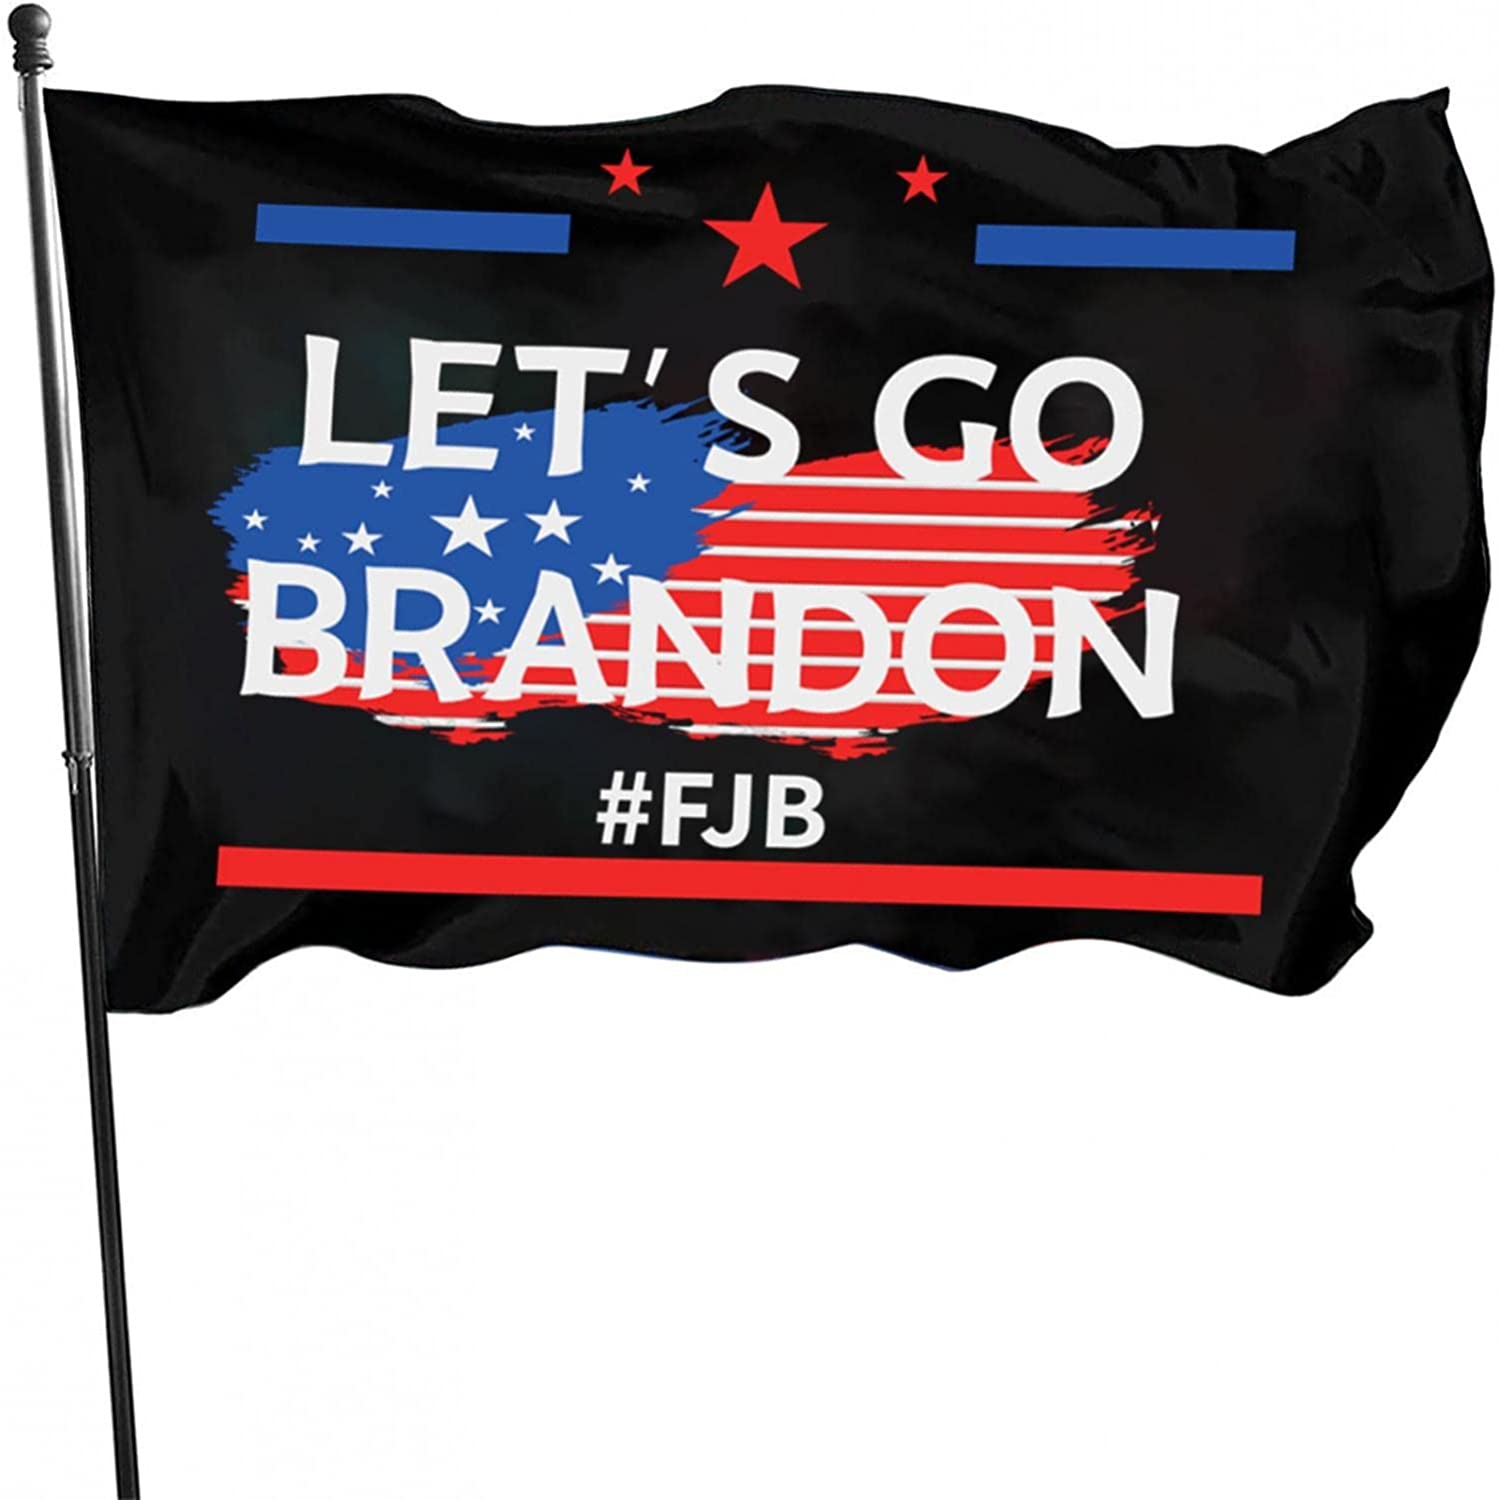 

Lets Go Brandon Flag, Drawing tools 3*5 Ft FJB Indoor Oudoor Garden Flags-Double Sided Printing Fadeproof Polyester Fabric with Brass Grommets